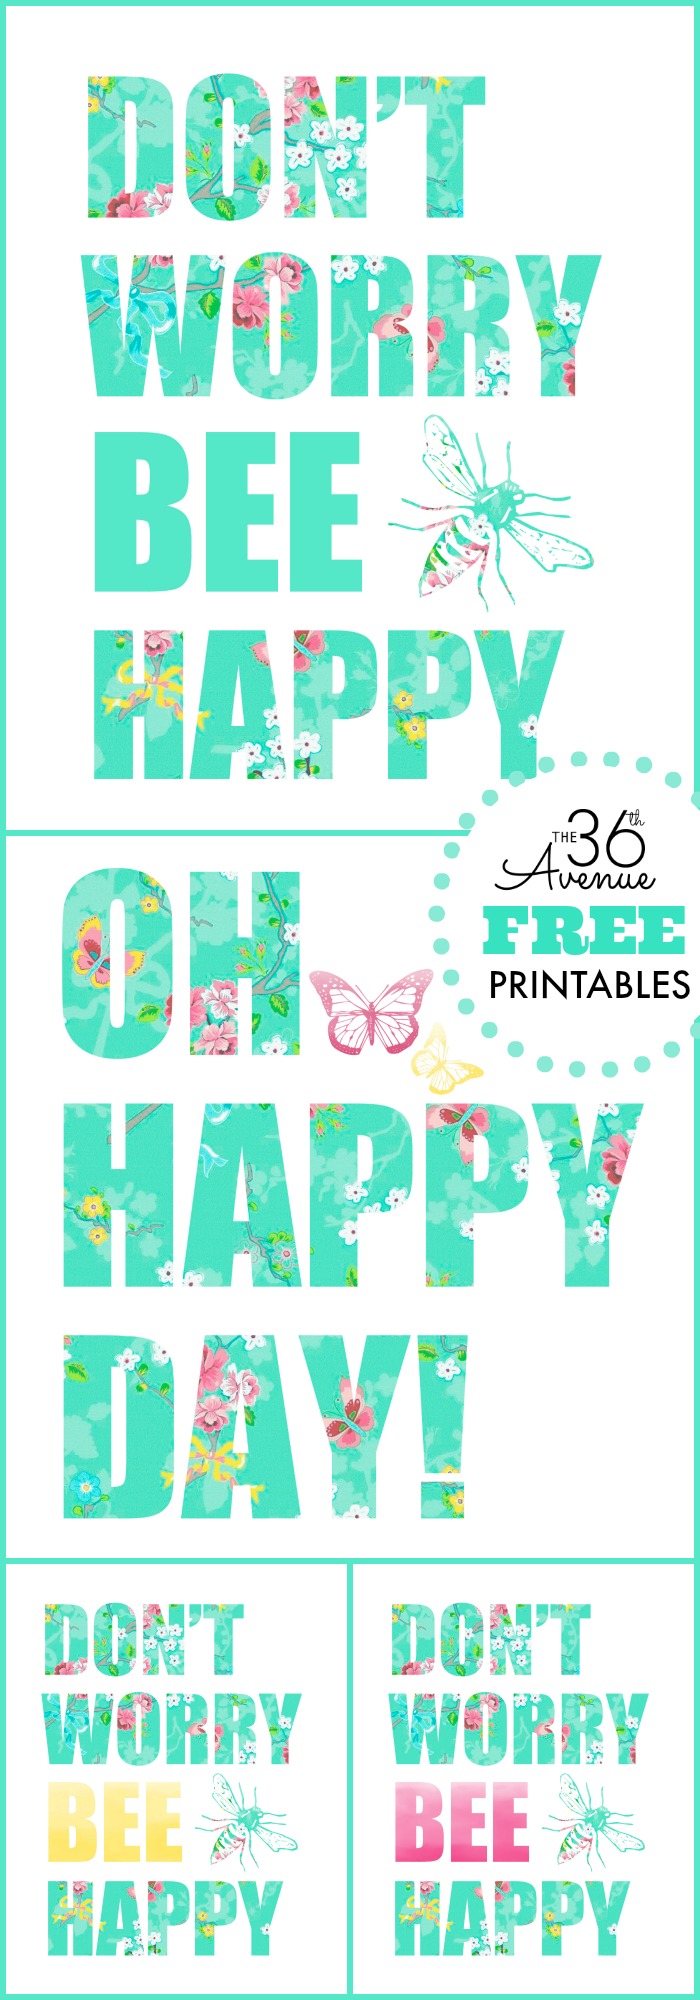 Free Printables - More colors at the36thavenue.com ...Pin it NOW and print them later!